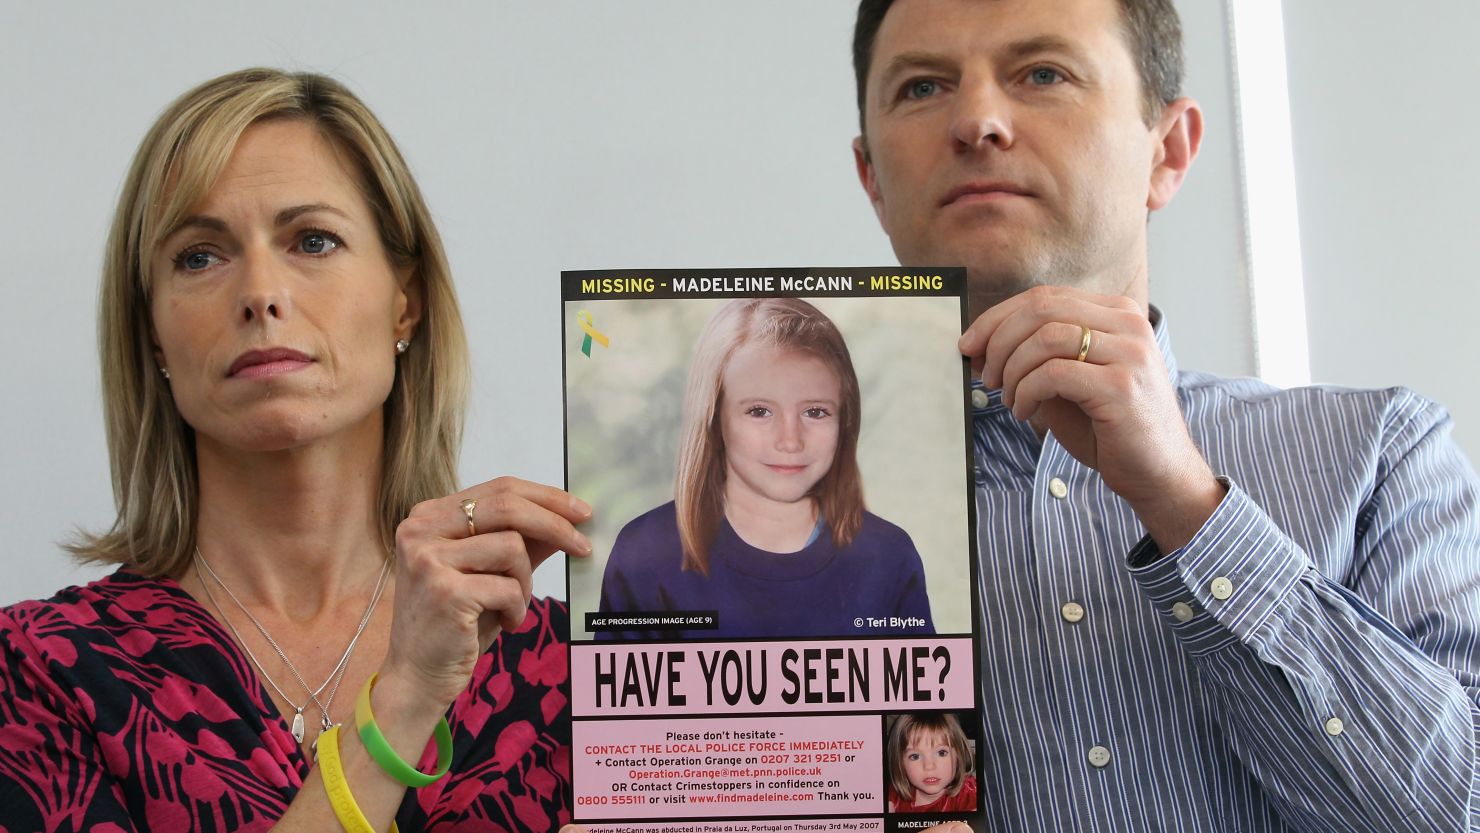 Kate and Gerry McCann hold an age-progressed police image of their daughter Madeleine during a news conference to mark the 5th anniversary of her disappearance, on May 2, 2012.